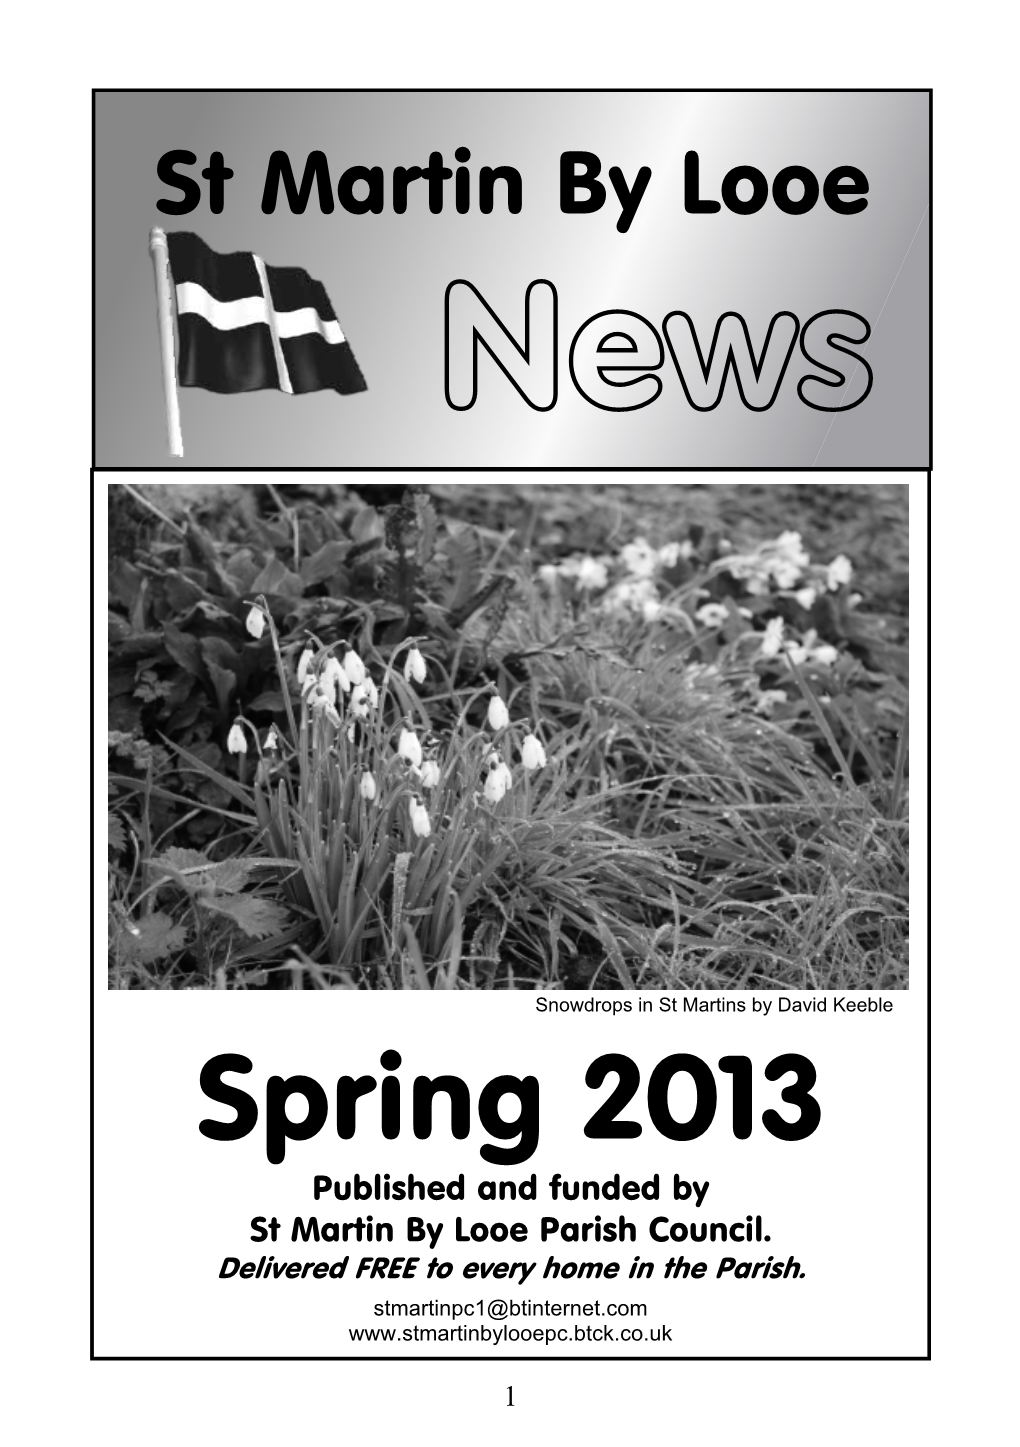 Spring 2013 Published and Funded by St Martin by Looe Parish Council